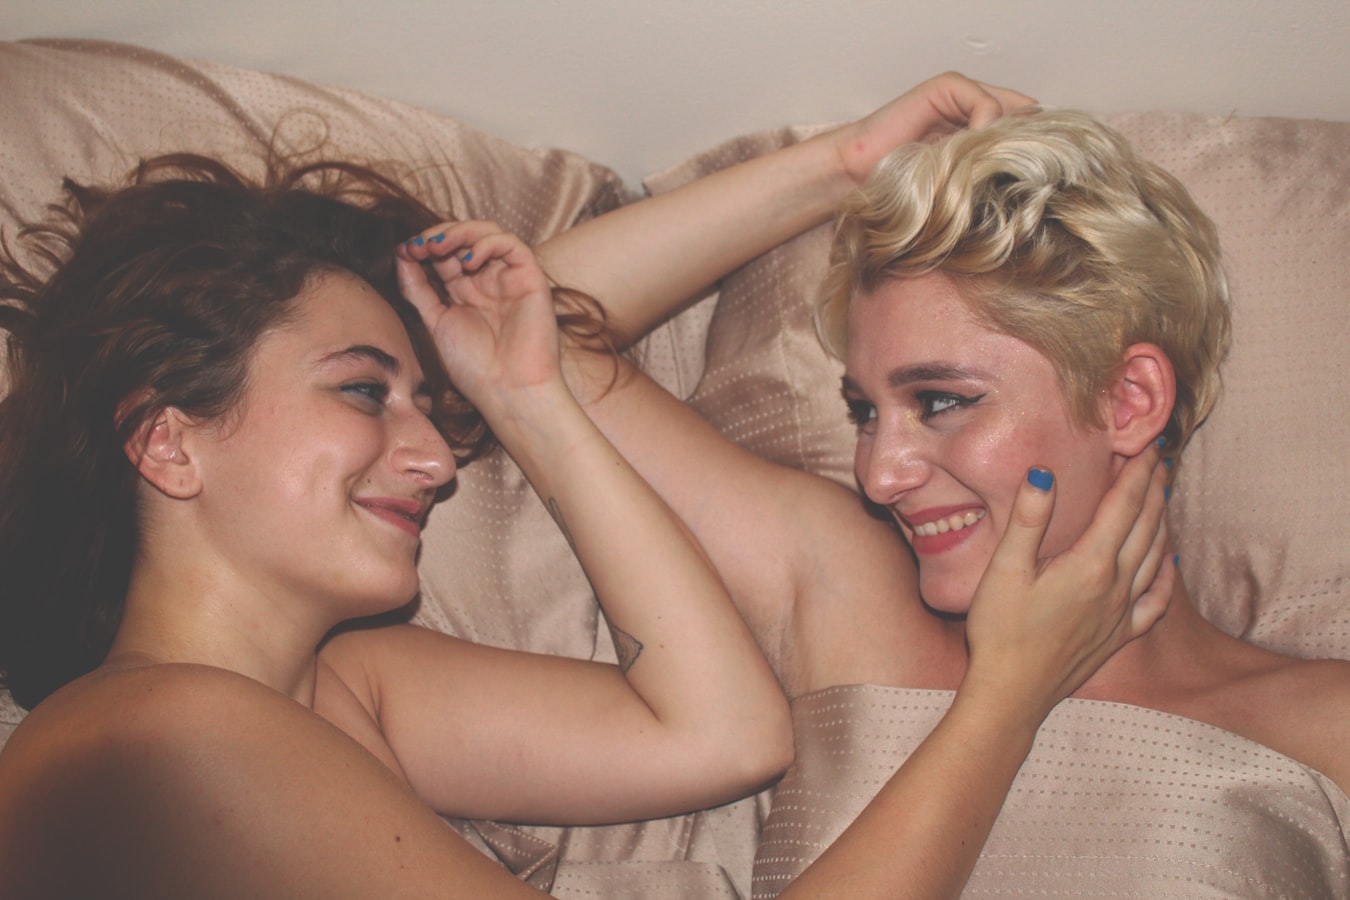 two people, smiling at each other, laying in a bed with beige sheets